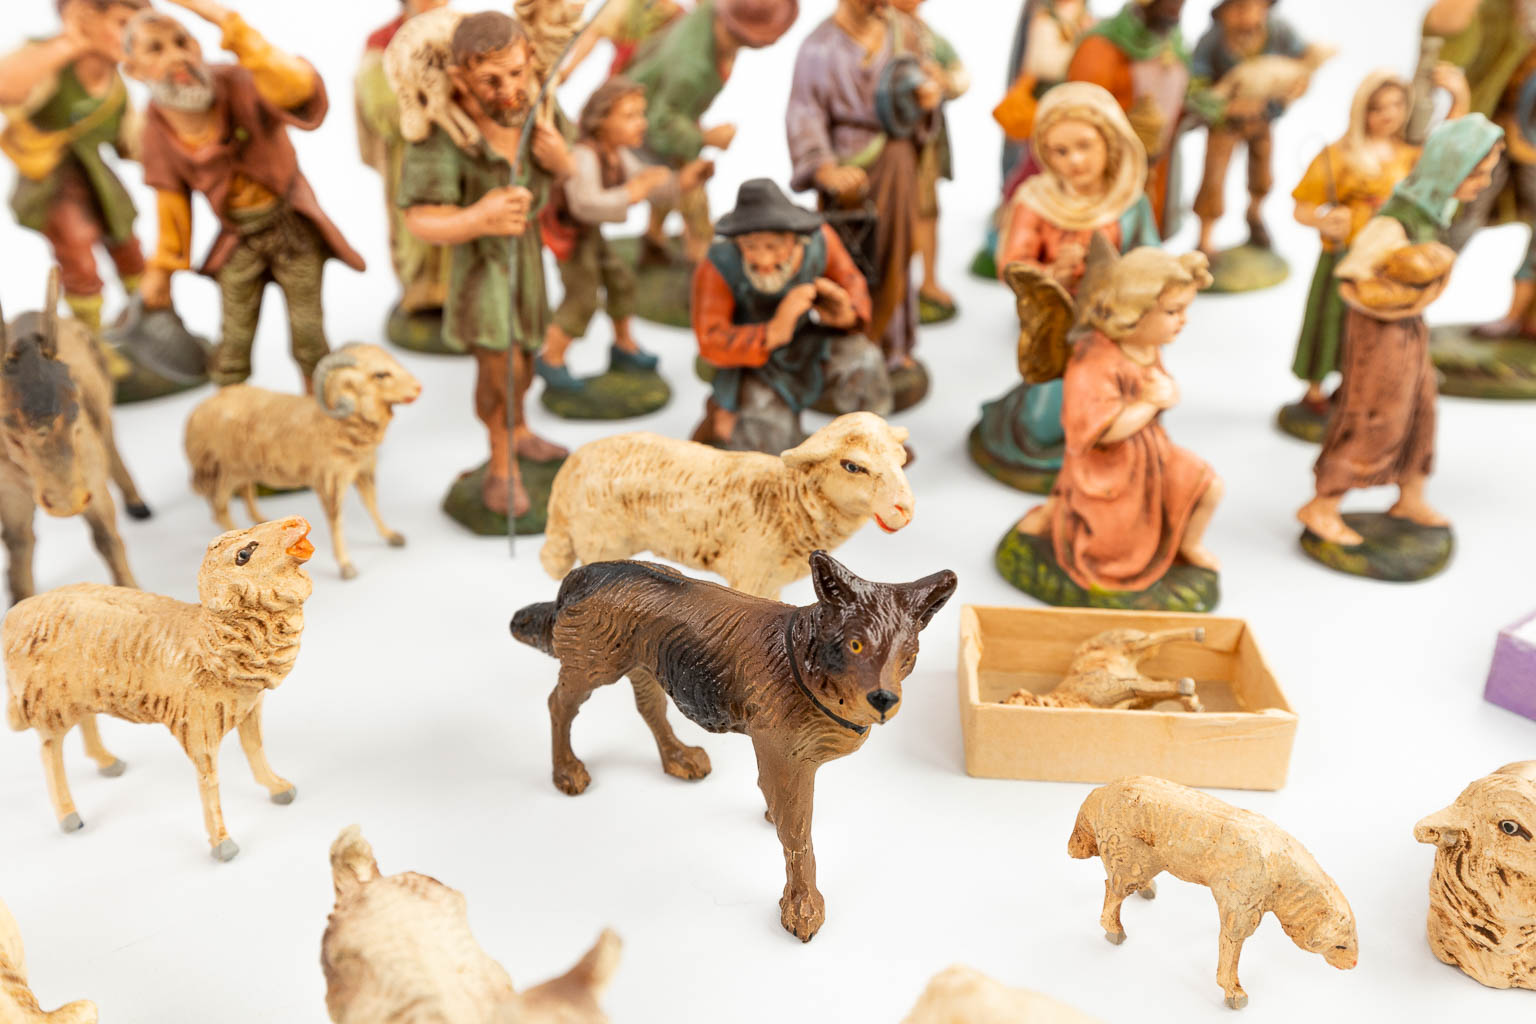 A large and extended Nativity scene with figurines and animals made of papier maché. 